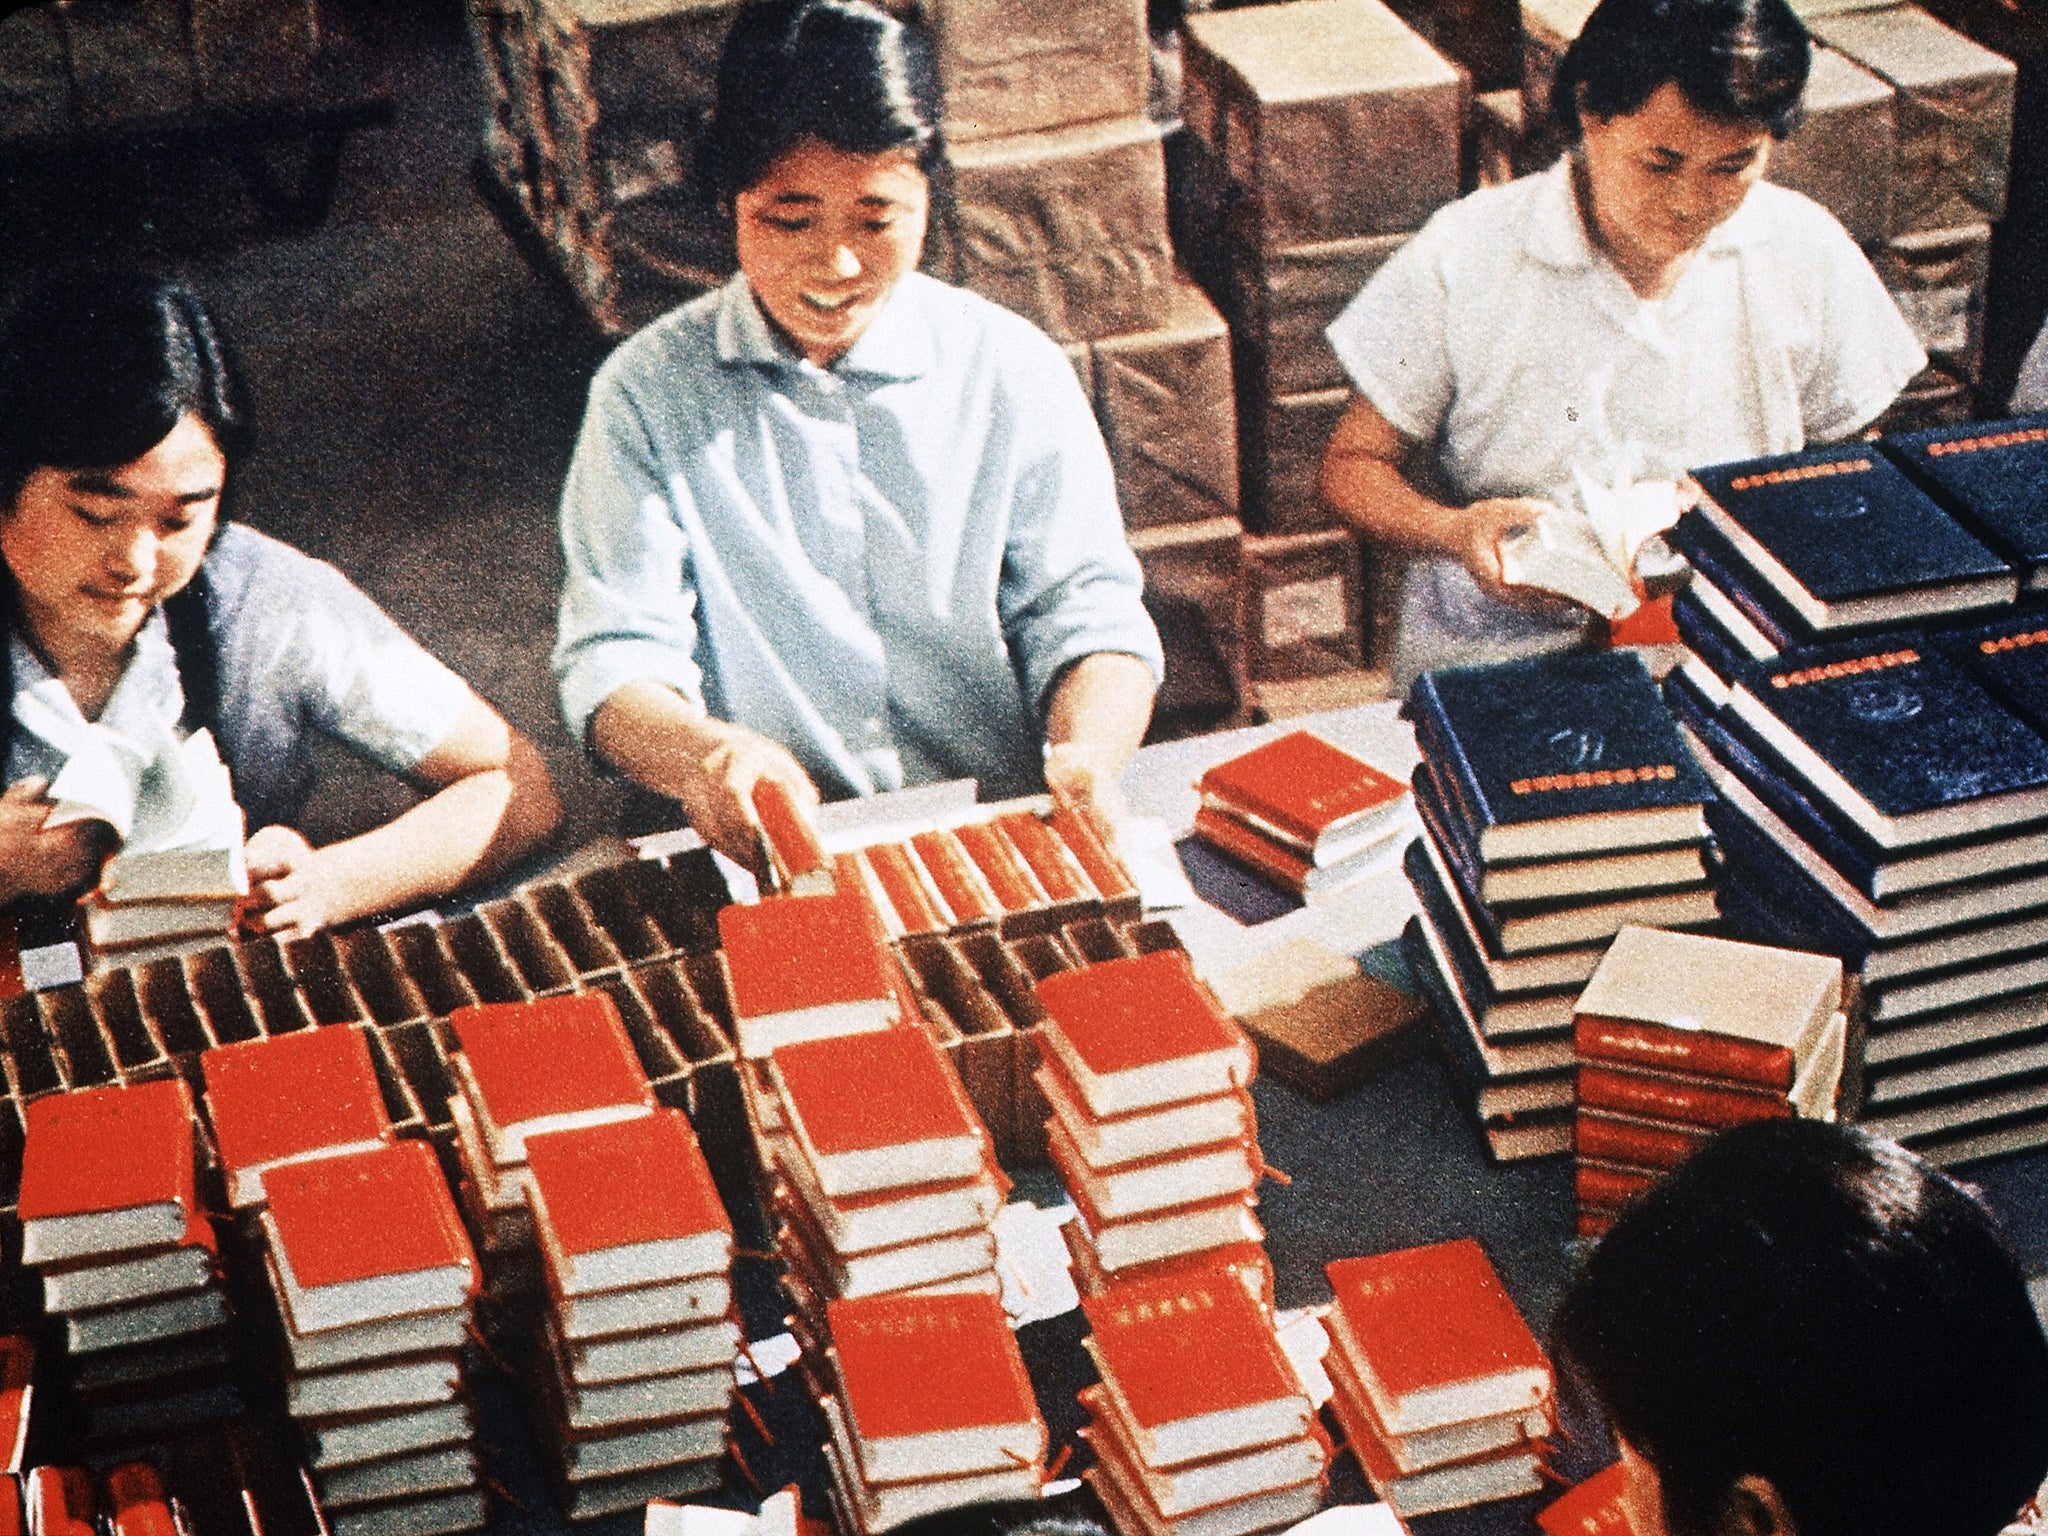 The bible of Maoism shifted the focus of revolutionary struggle from the urban workers or proletariat to the countryside and the peasantry (Getty)